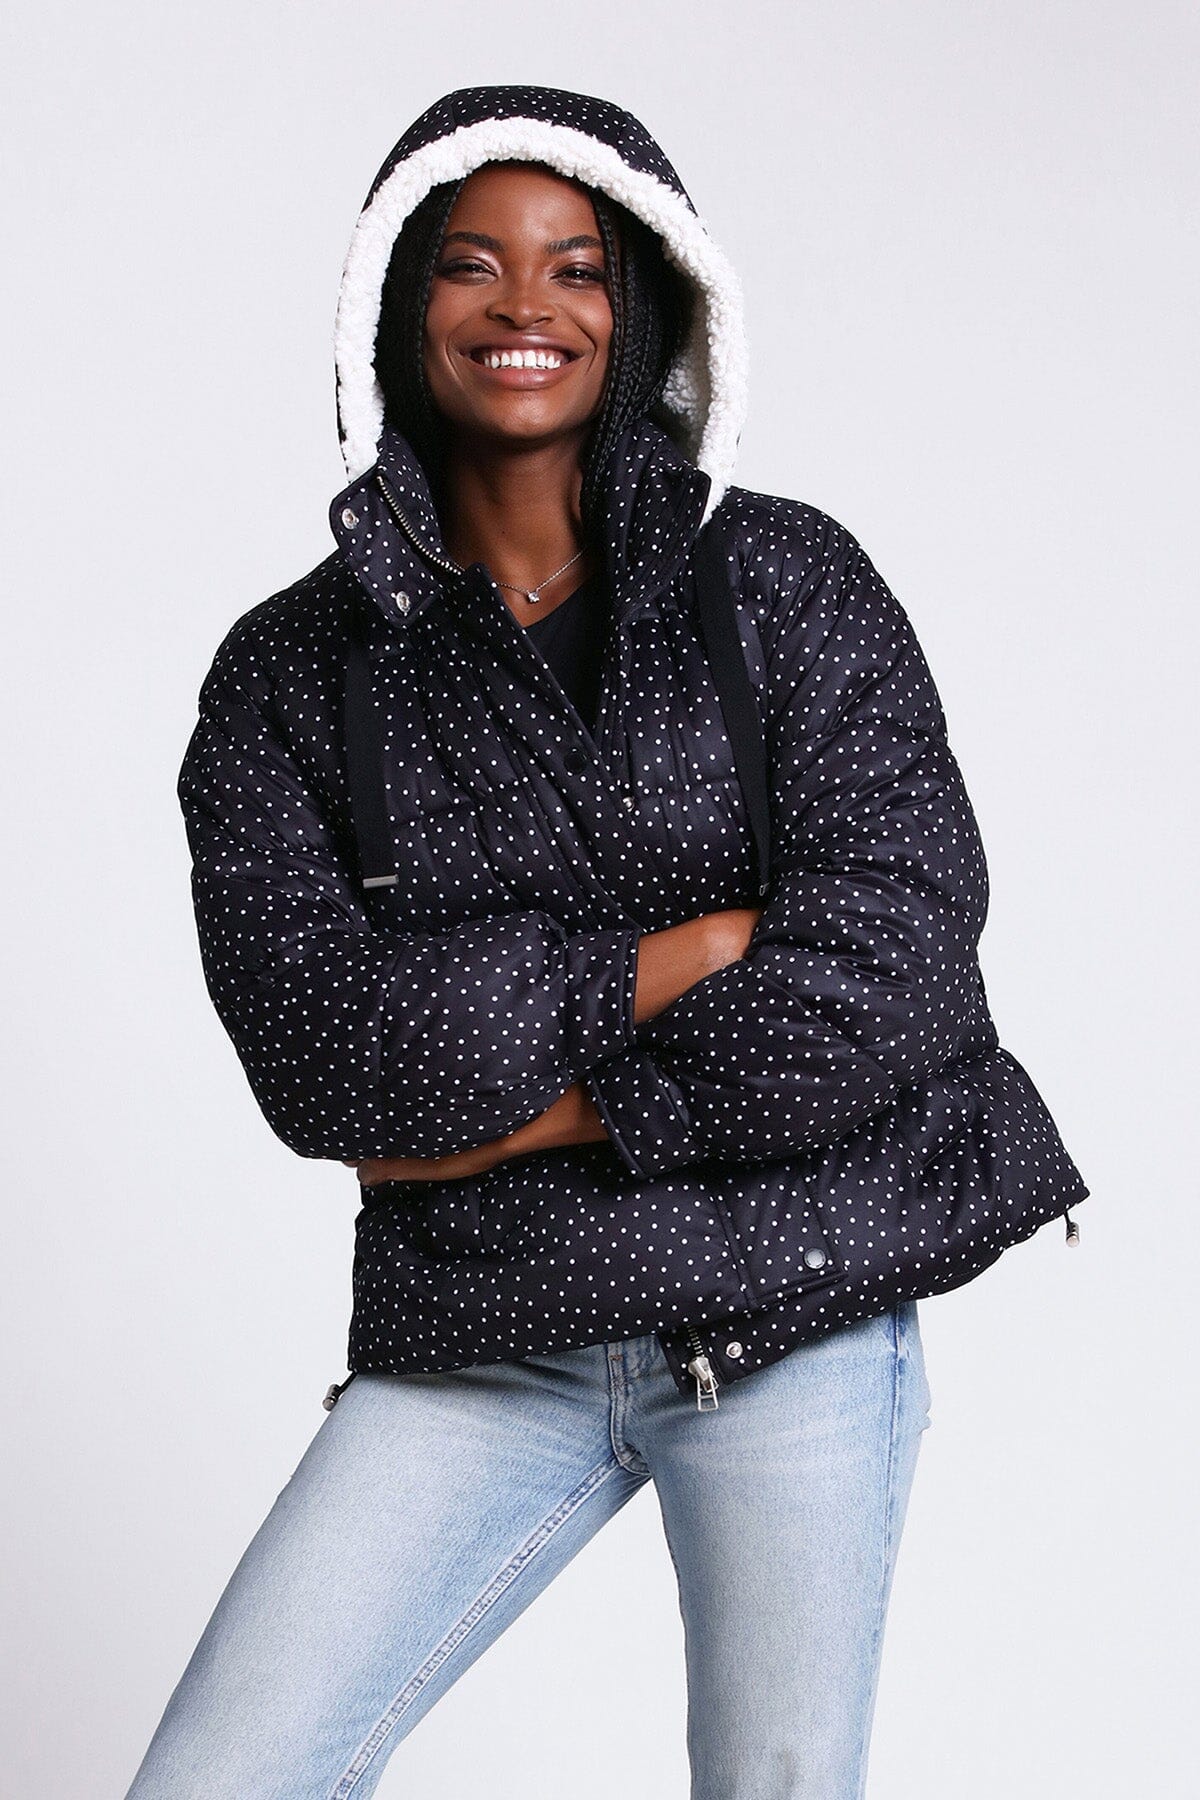 printed thermal puff hooded puffer jacket coat black and white polka dots - figure flattering warm cozy puffers outerwear for women